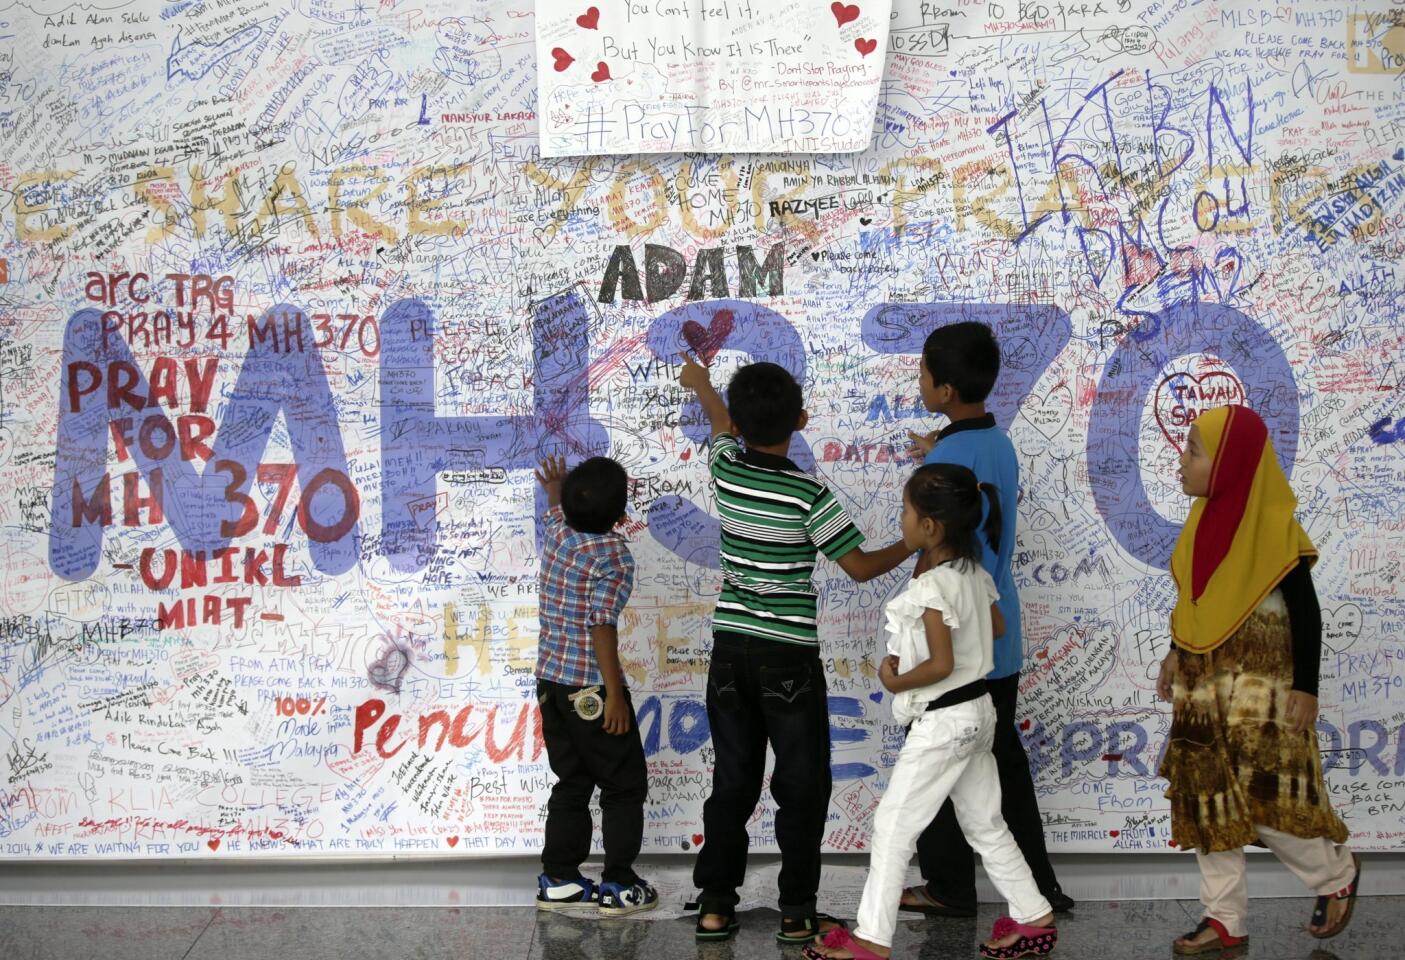 Children take at a closer look at messages on the Wall of Hope for the passengers of the missing Malaysian Airlines plane at Kuala Lumpur International Airport, Malaysia, 17 March 2014.